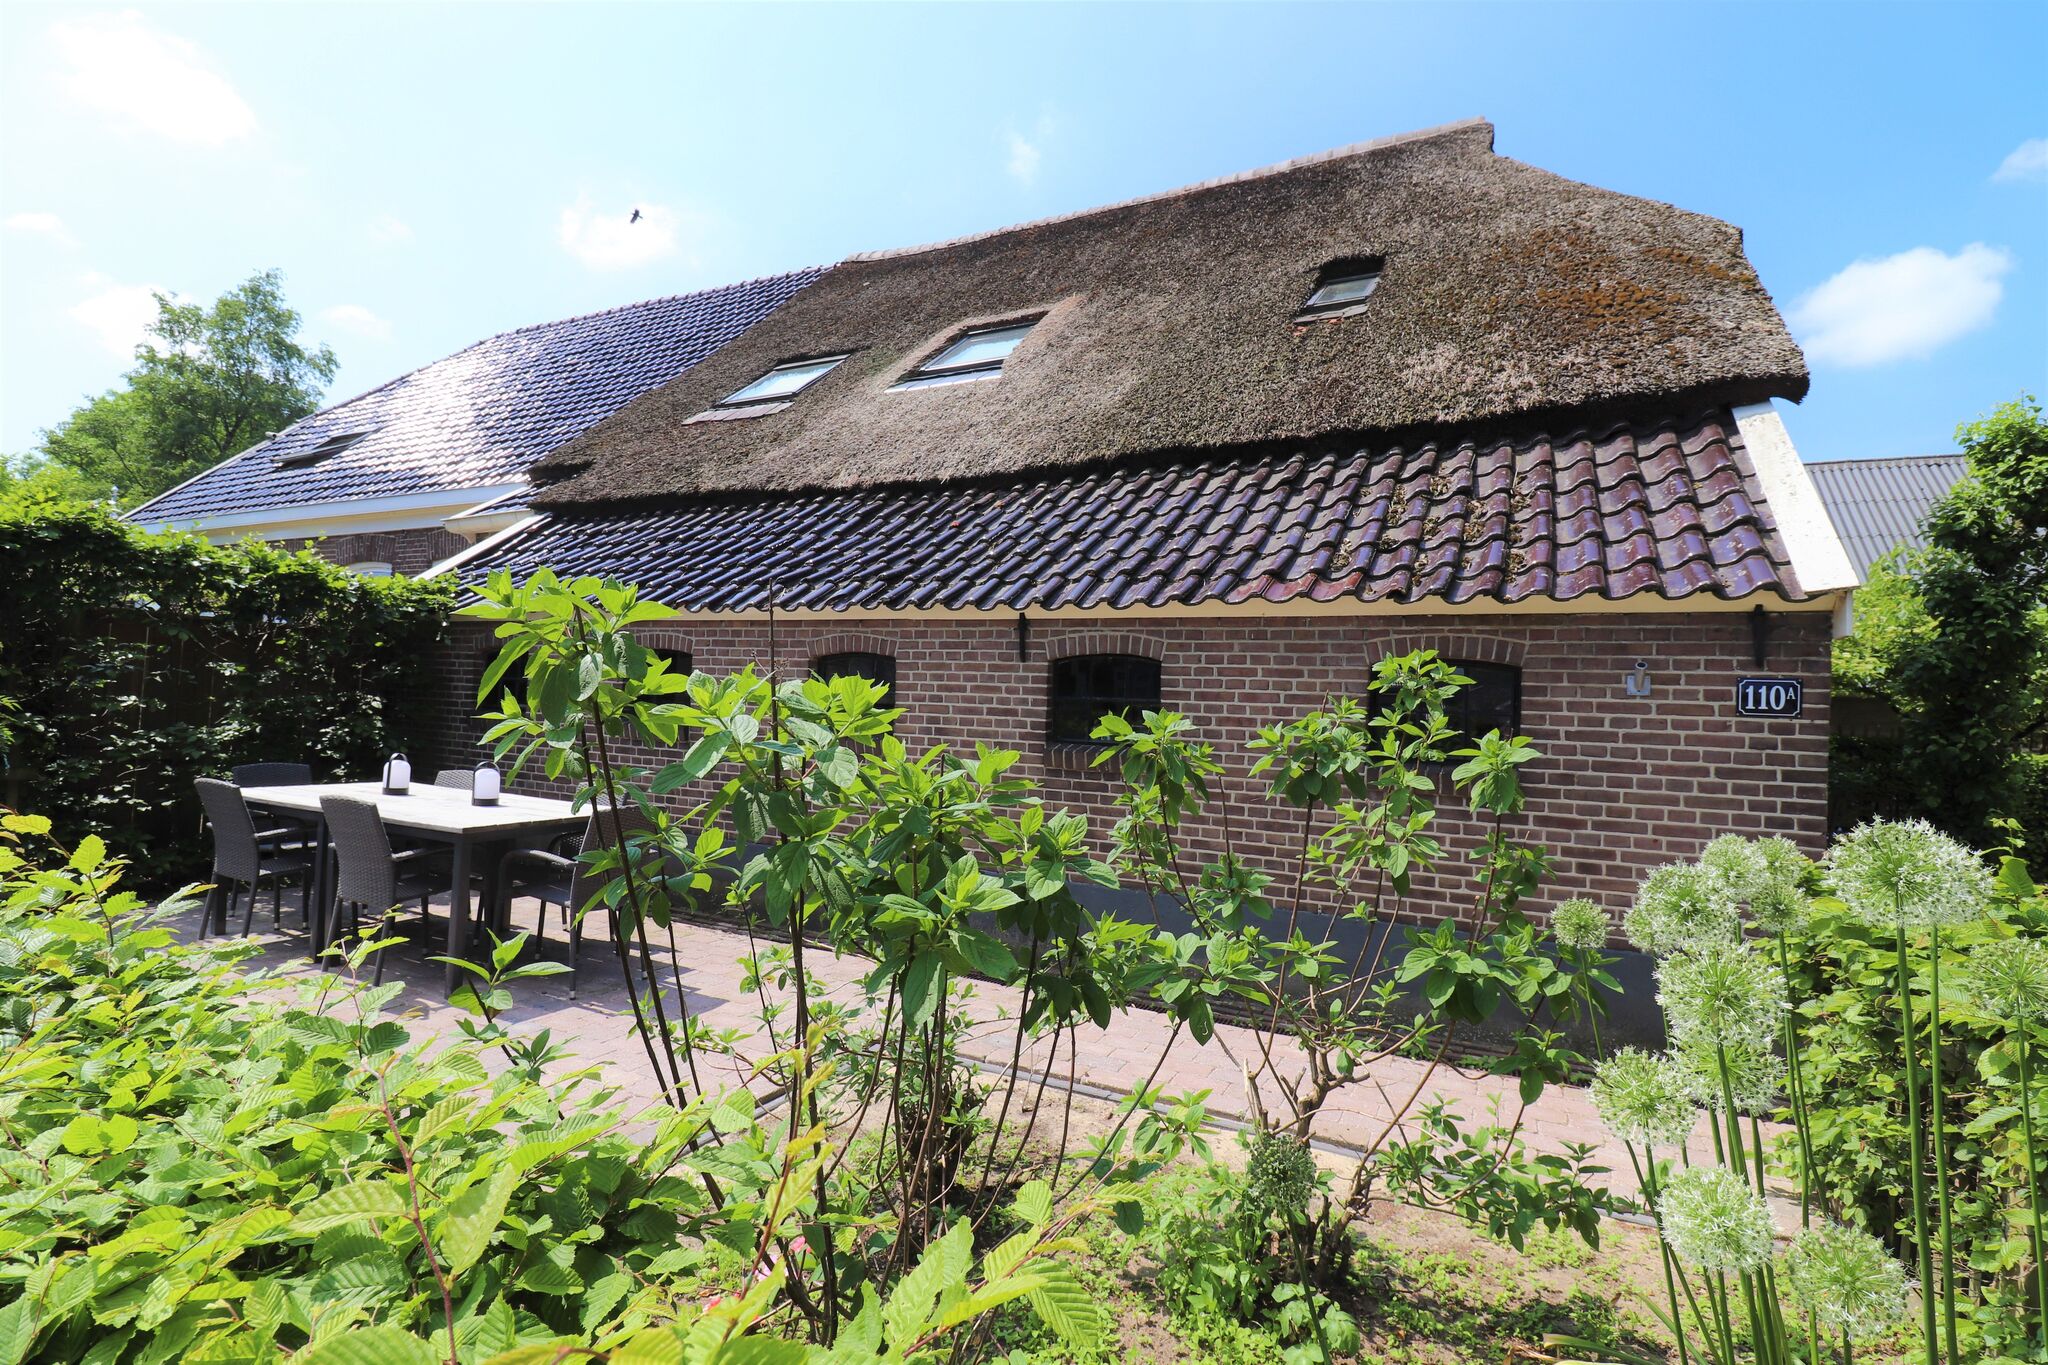 Large farmhouse in Dalerveen with a nice terrace